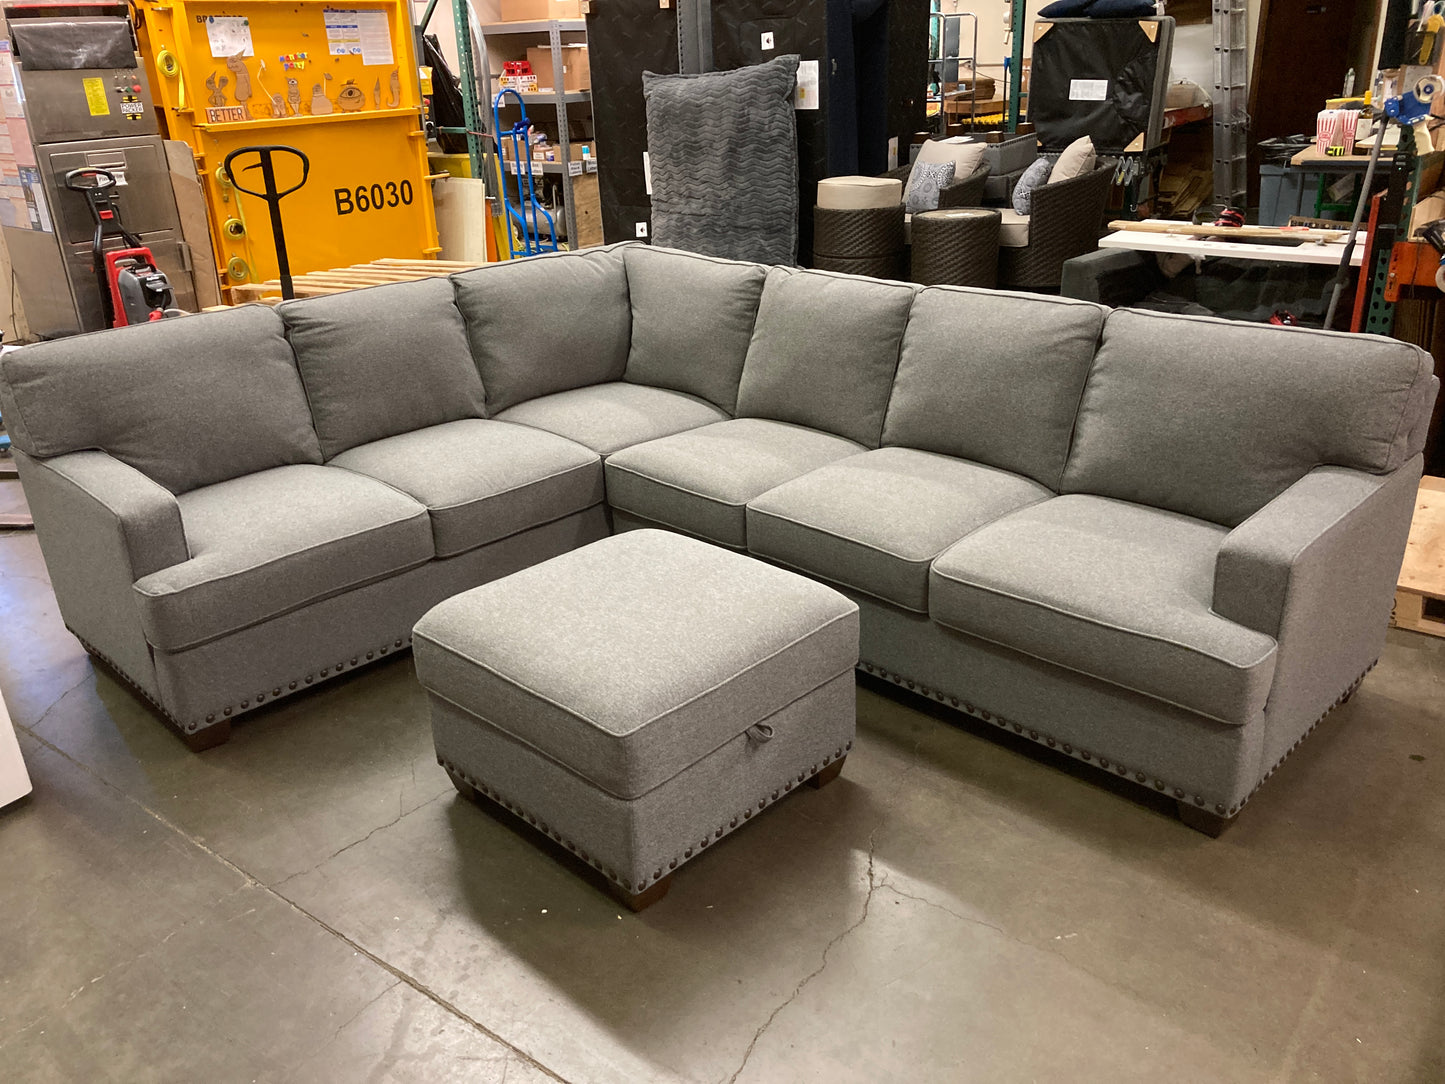 Costco - Thomasville Emilee Fabric Sectional with Storage Ottoman - Retail $1499